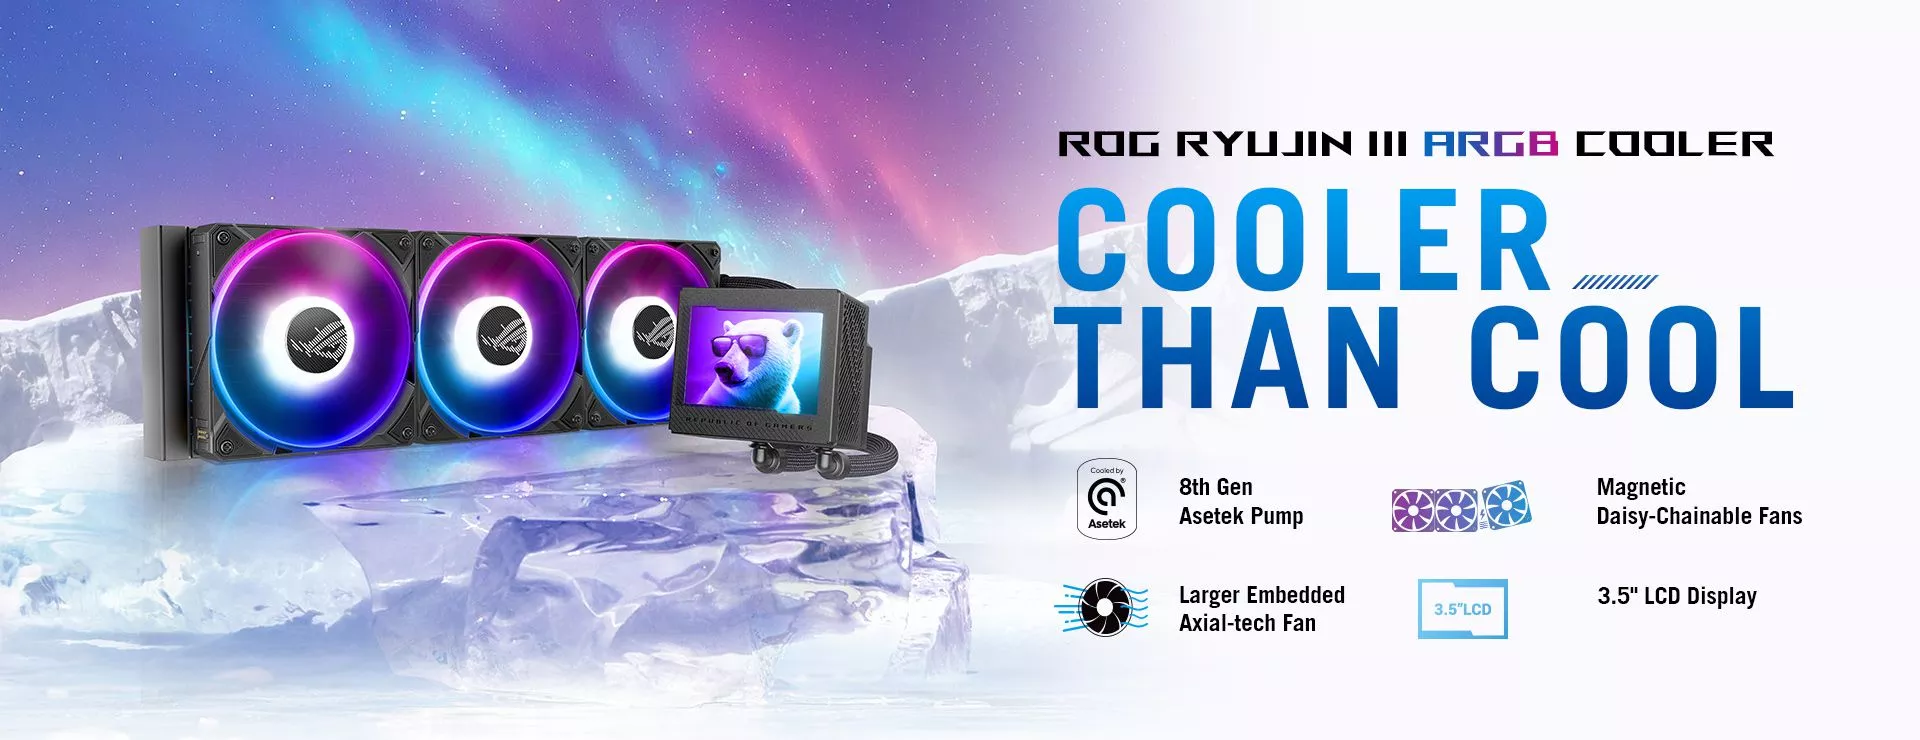 ROG RYUJIN III ARGB COOLER Cooler Than Cool 8th Gen Asetek Pump.  Magnetic Daisy-Chainable Fans.  Larger Embedded Axial-tech Fan.  3.5" LCD Display